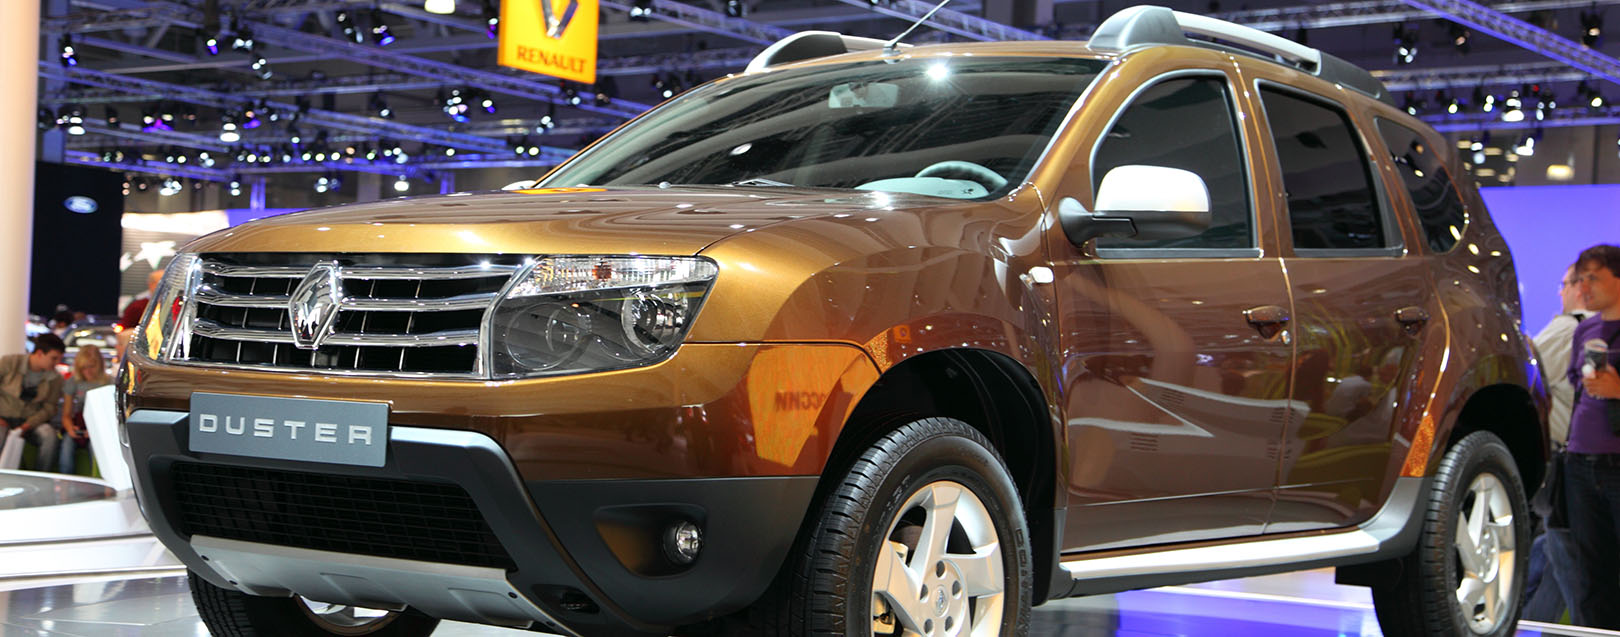 Kwid, Duster to be exported to Nepal from India